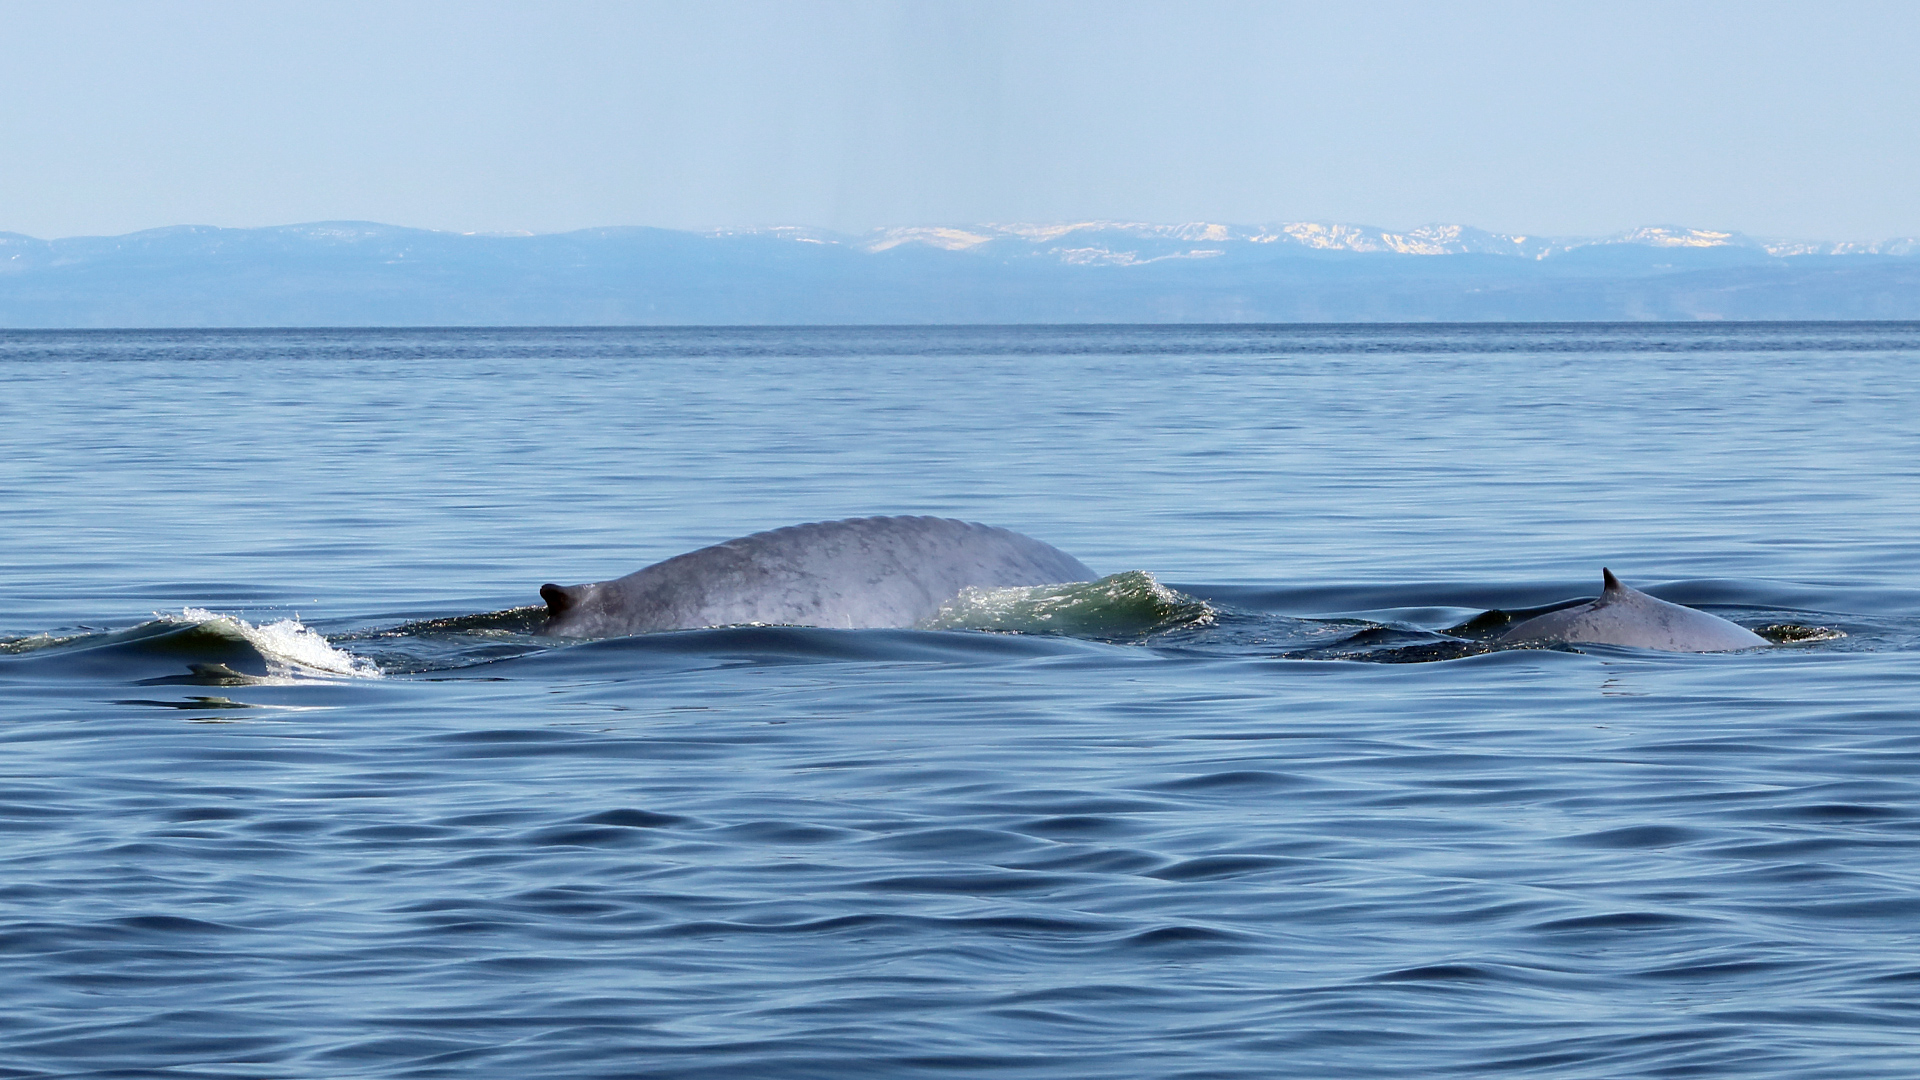 The backs of two blue whales can be seen on the water surface: a larger one on the left and a smaller one on the right.